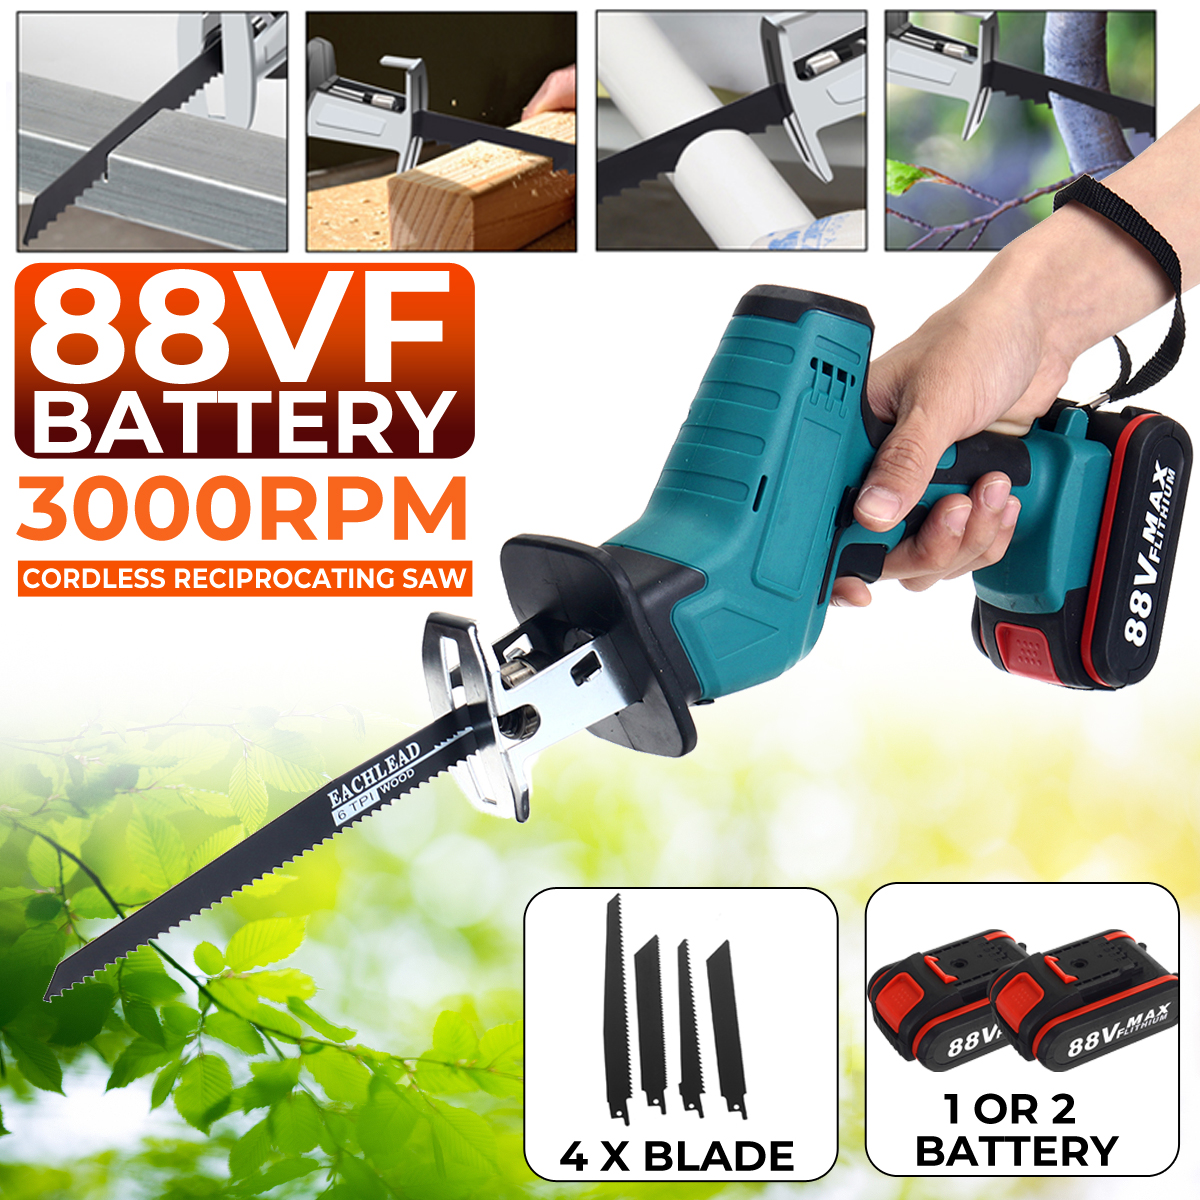 88VF-Cordless-Electric-Reciprocating-Saw-Garden-Wood-Cutting-Pruning-Saw-1761115-2